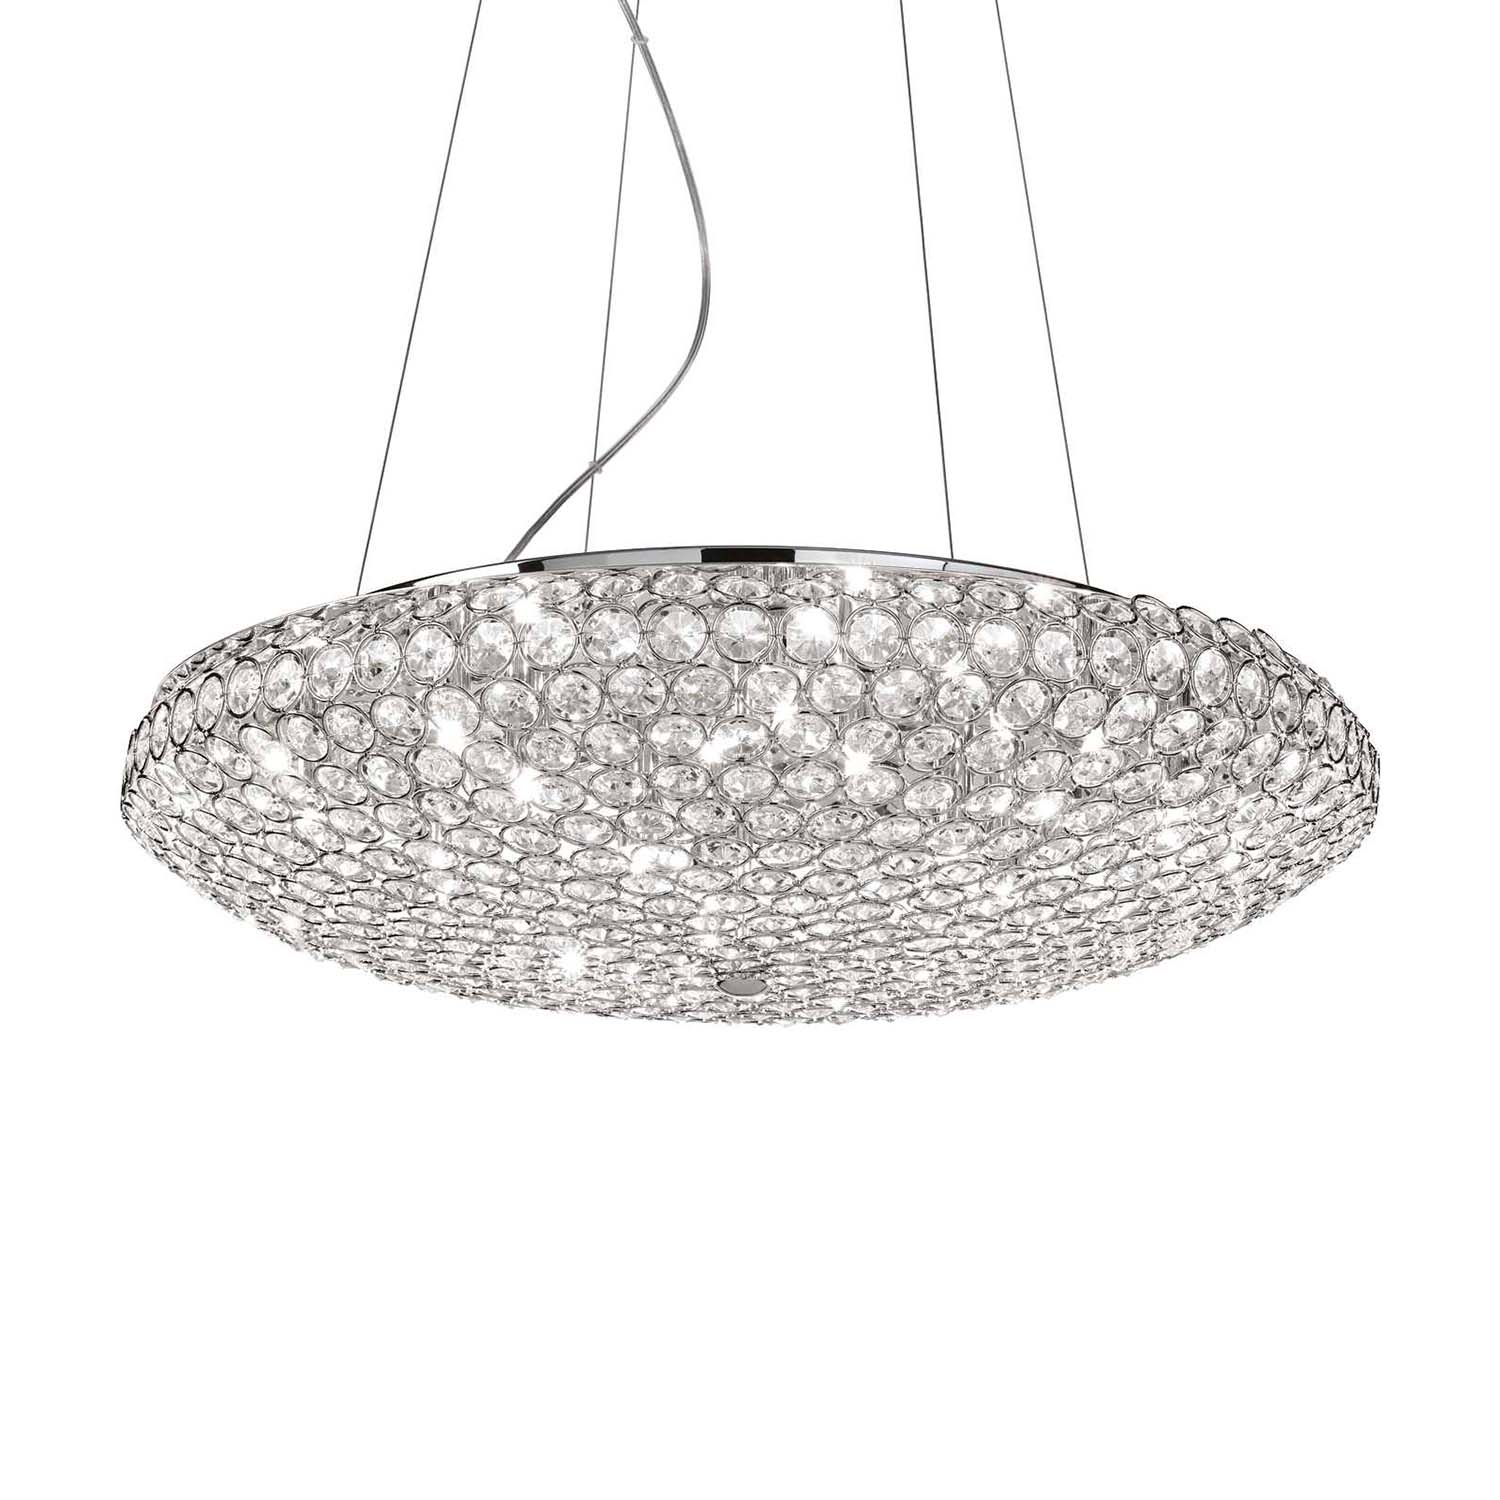 KING - Round baroque style crystal chandelier